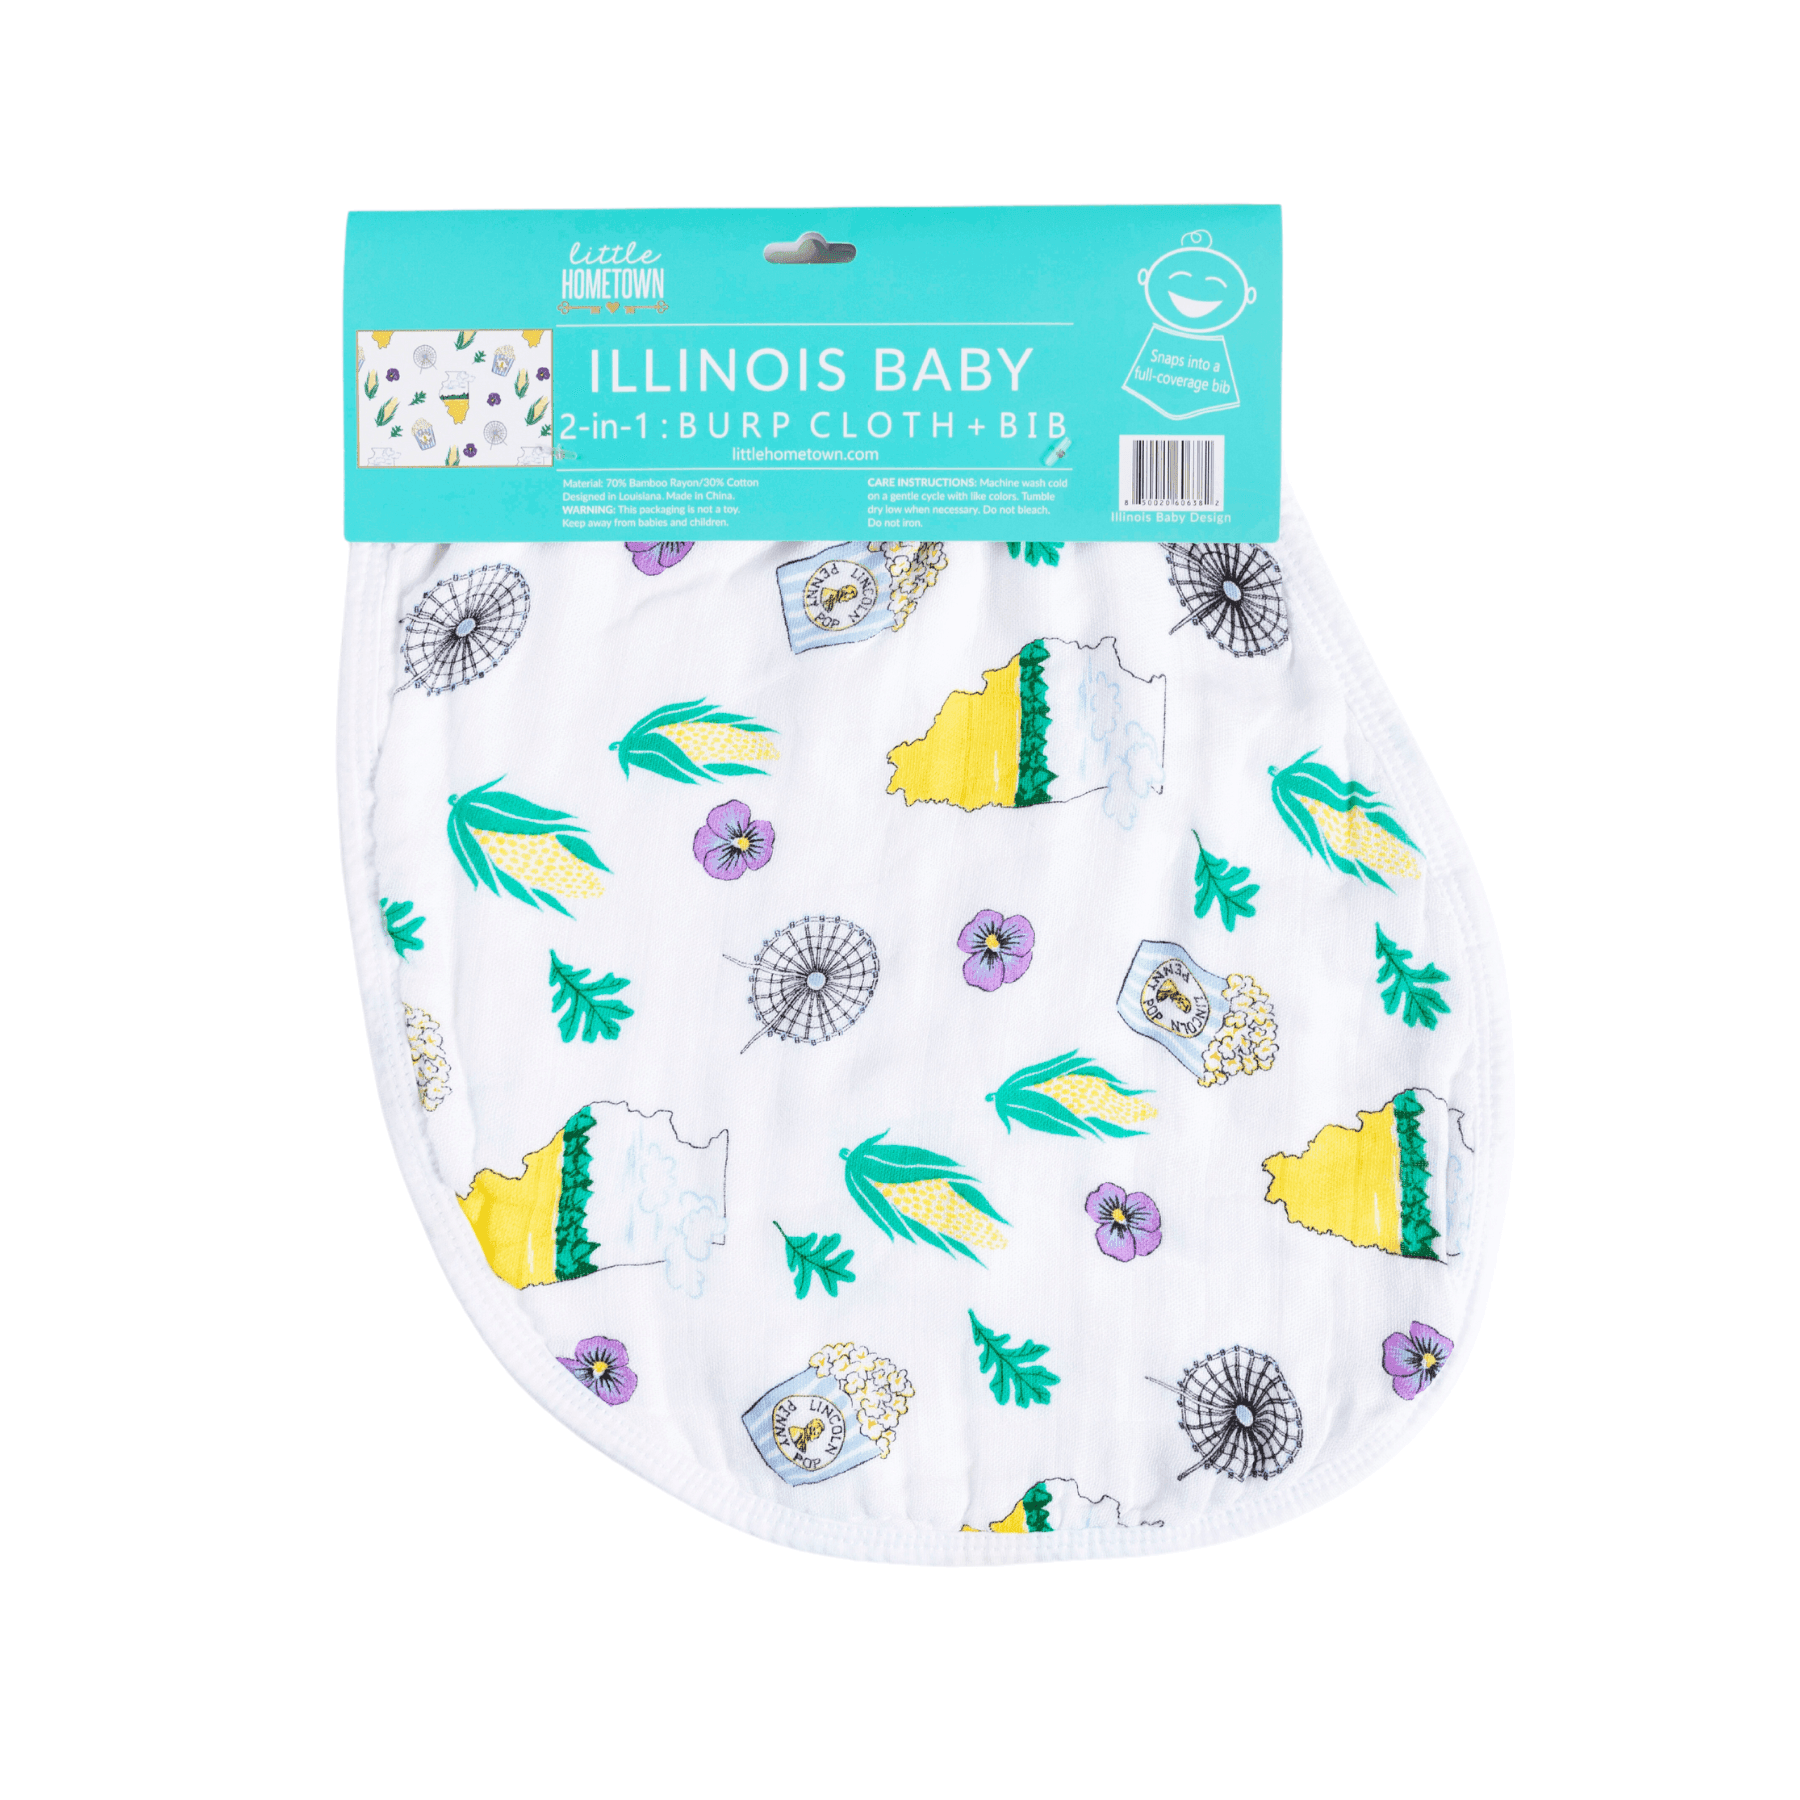 Baby bib and burp cloth set with Illinois state map design, featuring landmarks and icons in soft pastel colors.